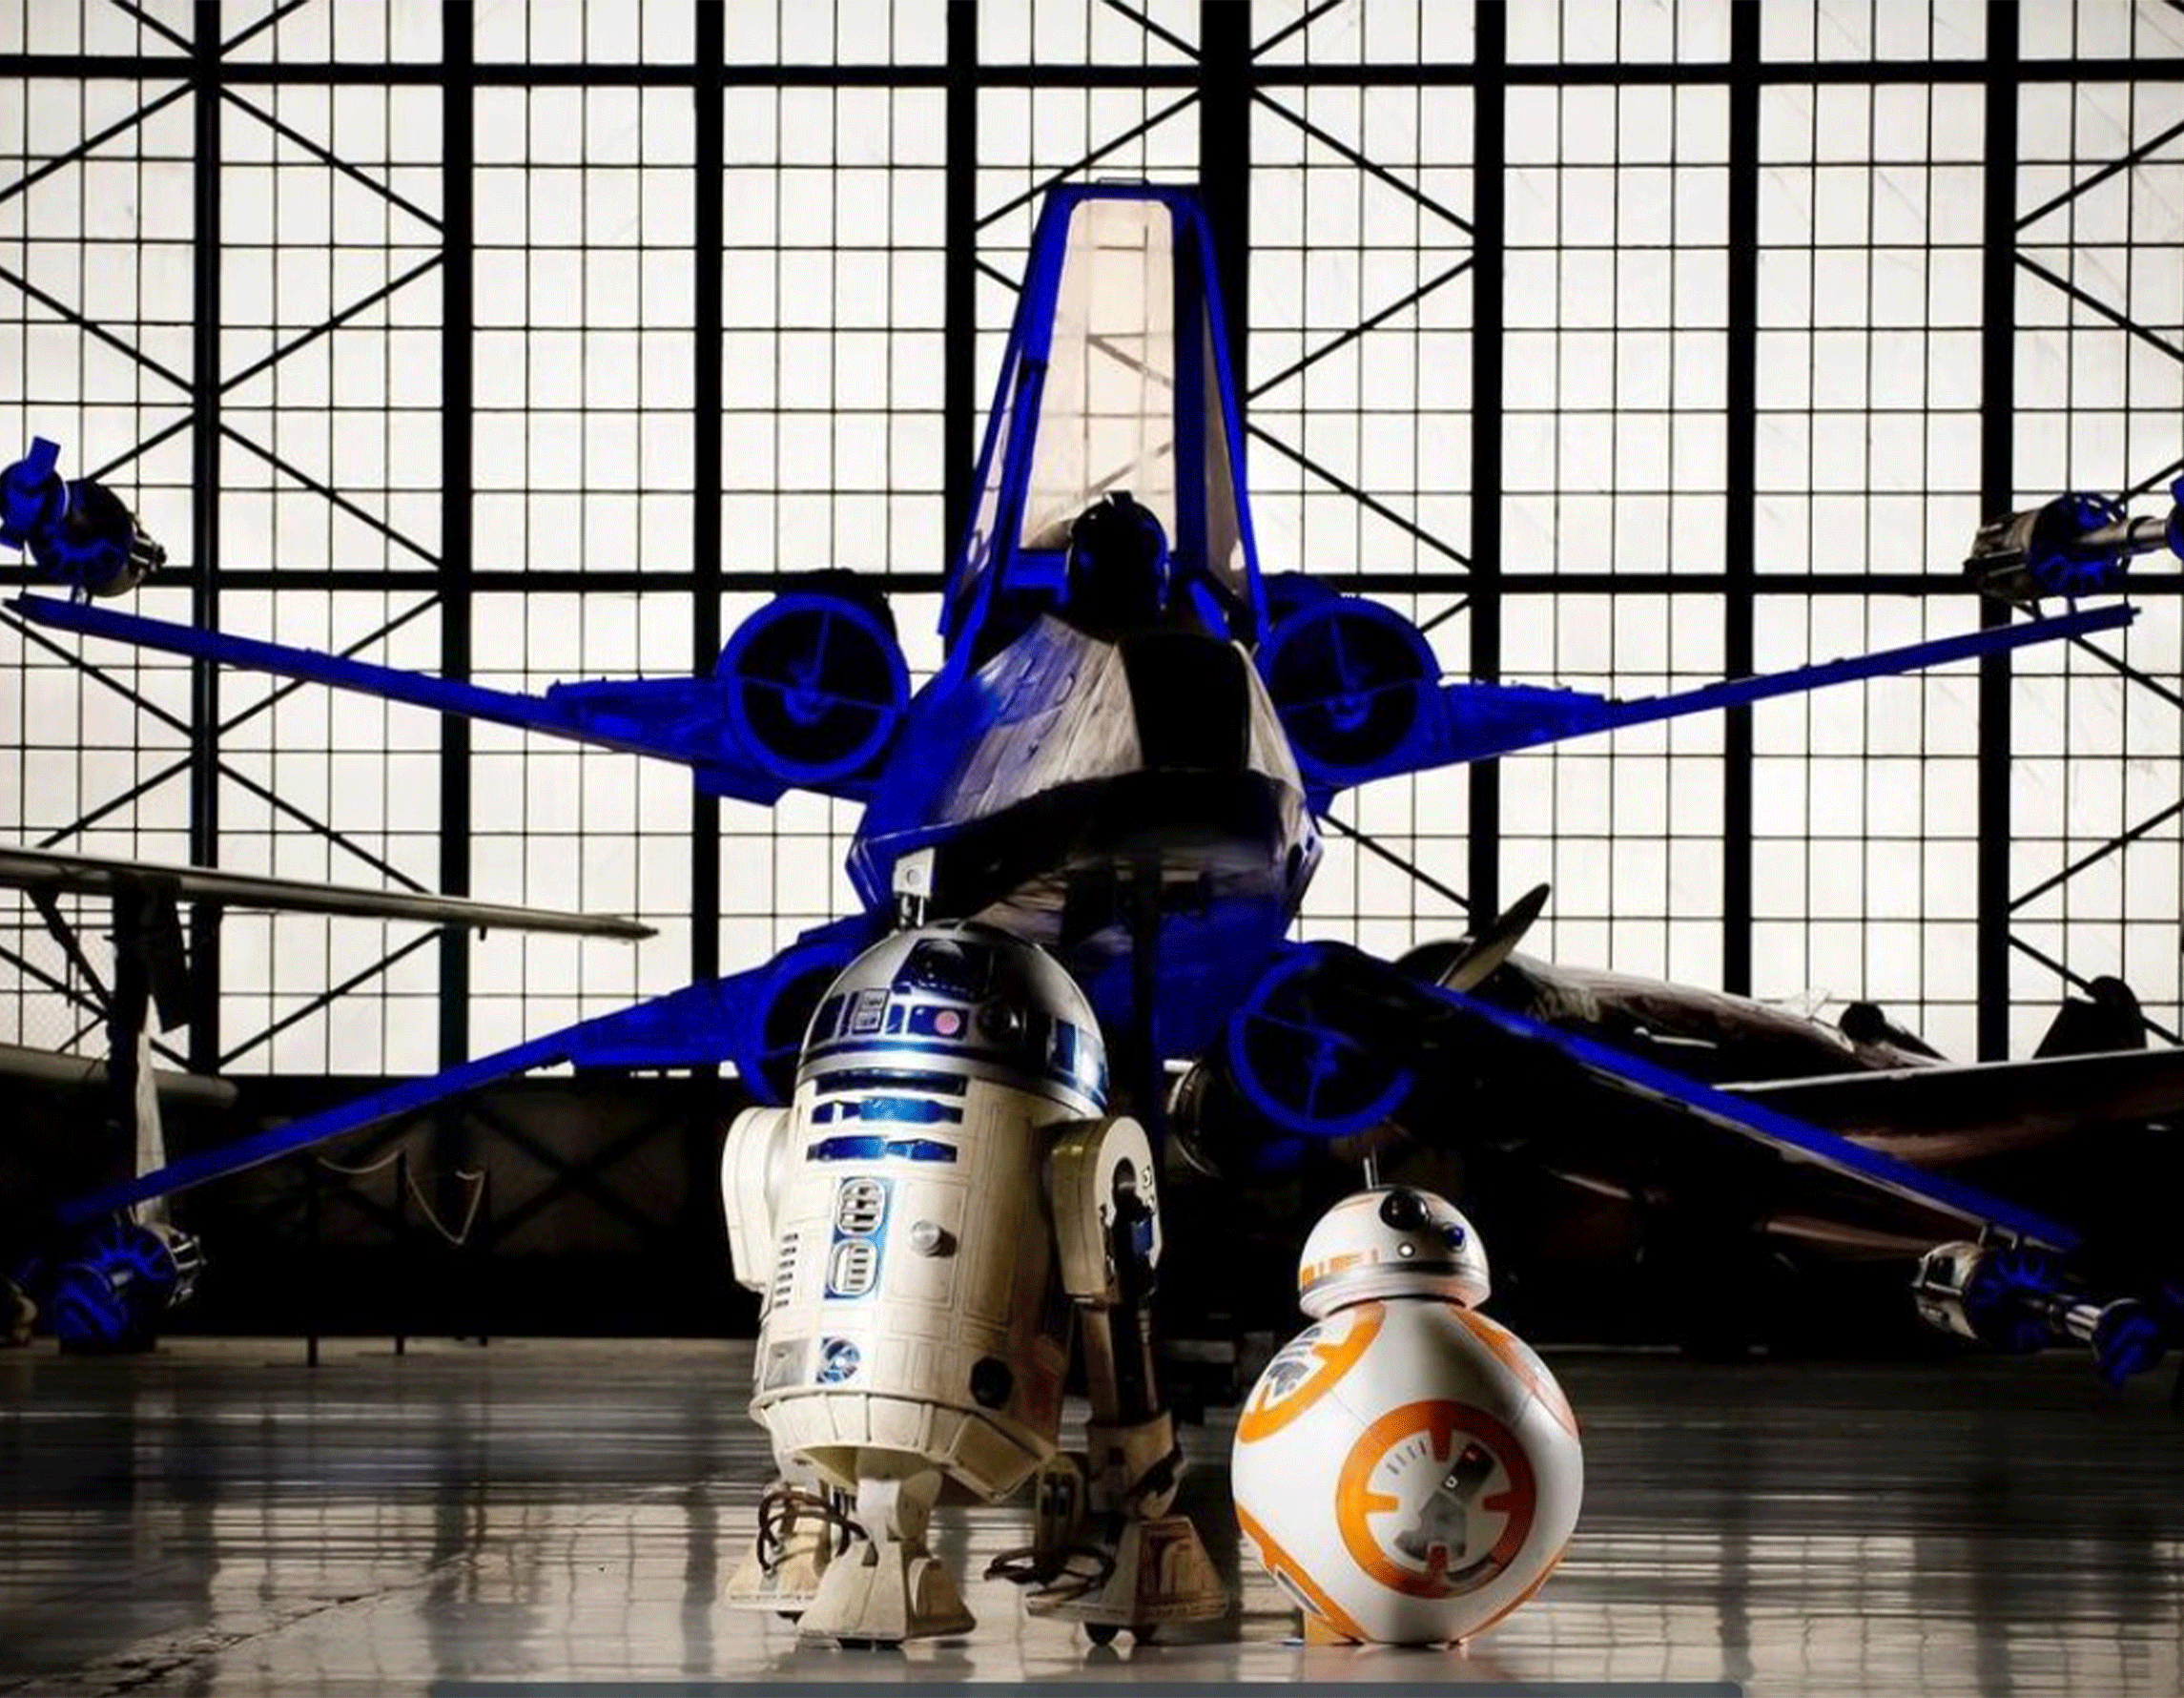 X-Wing and R2-D2